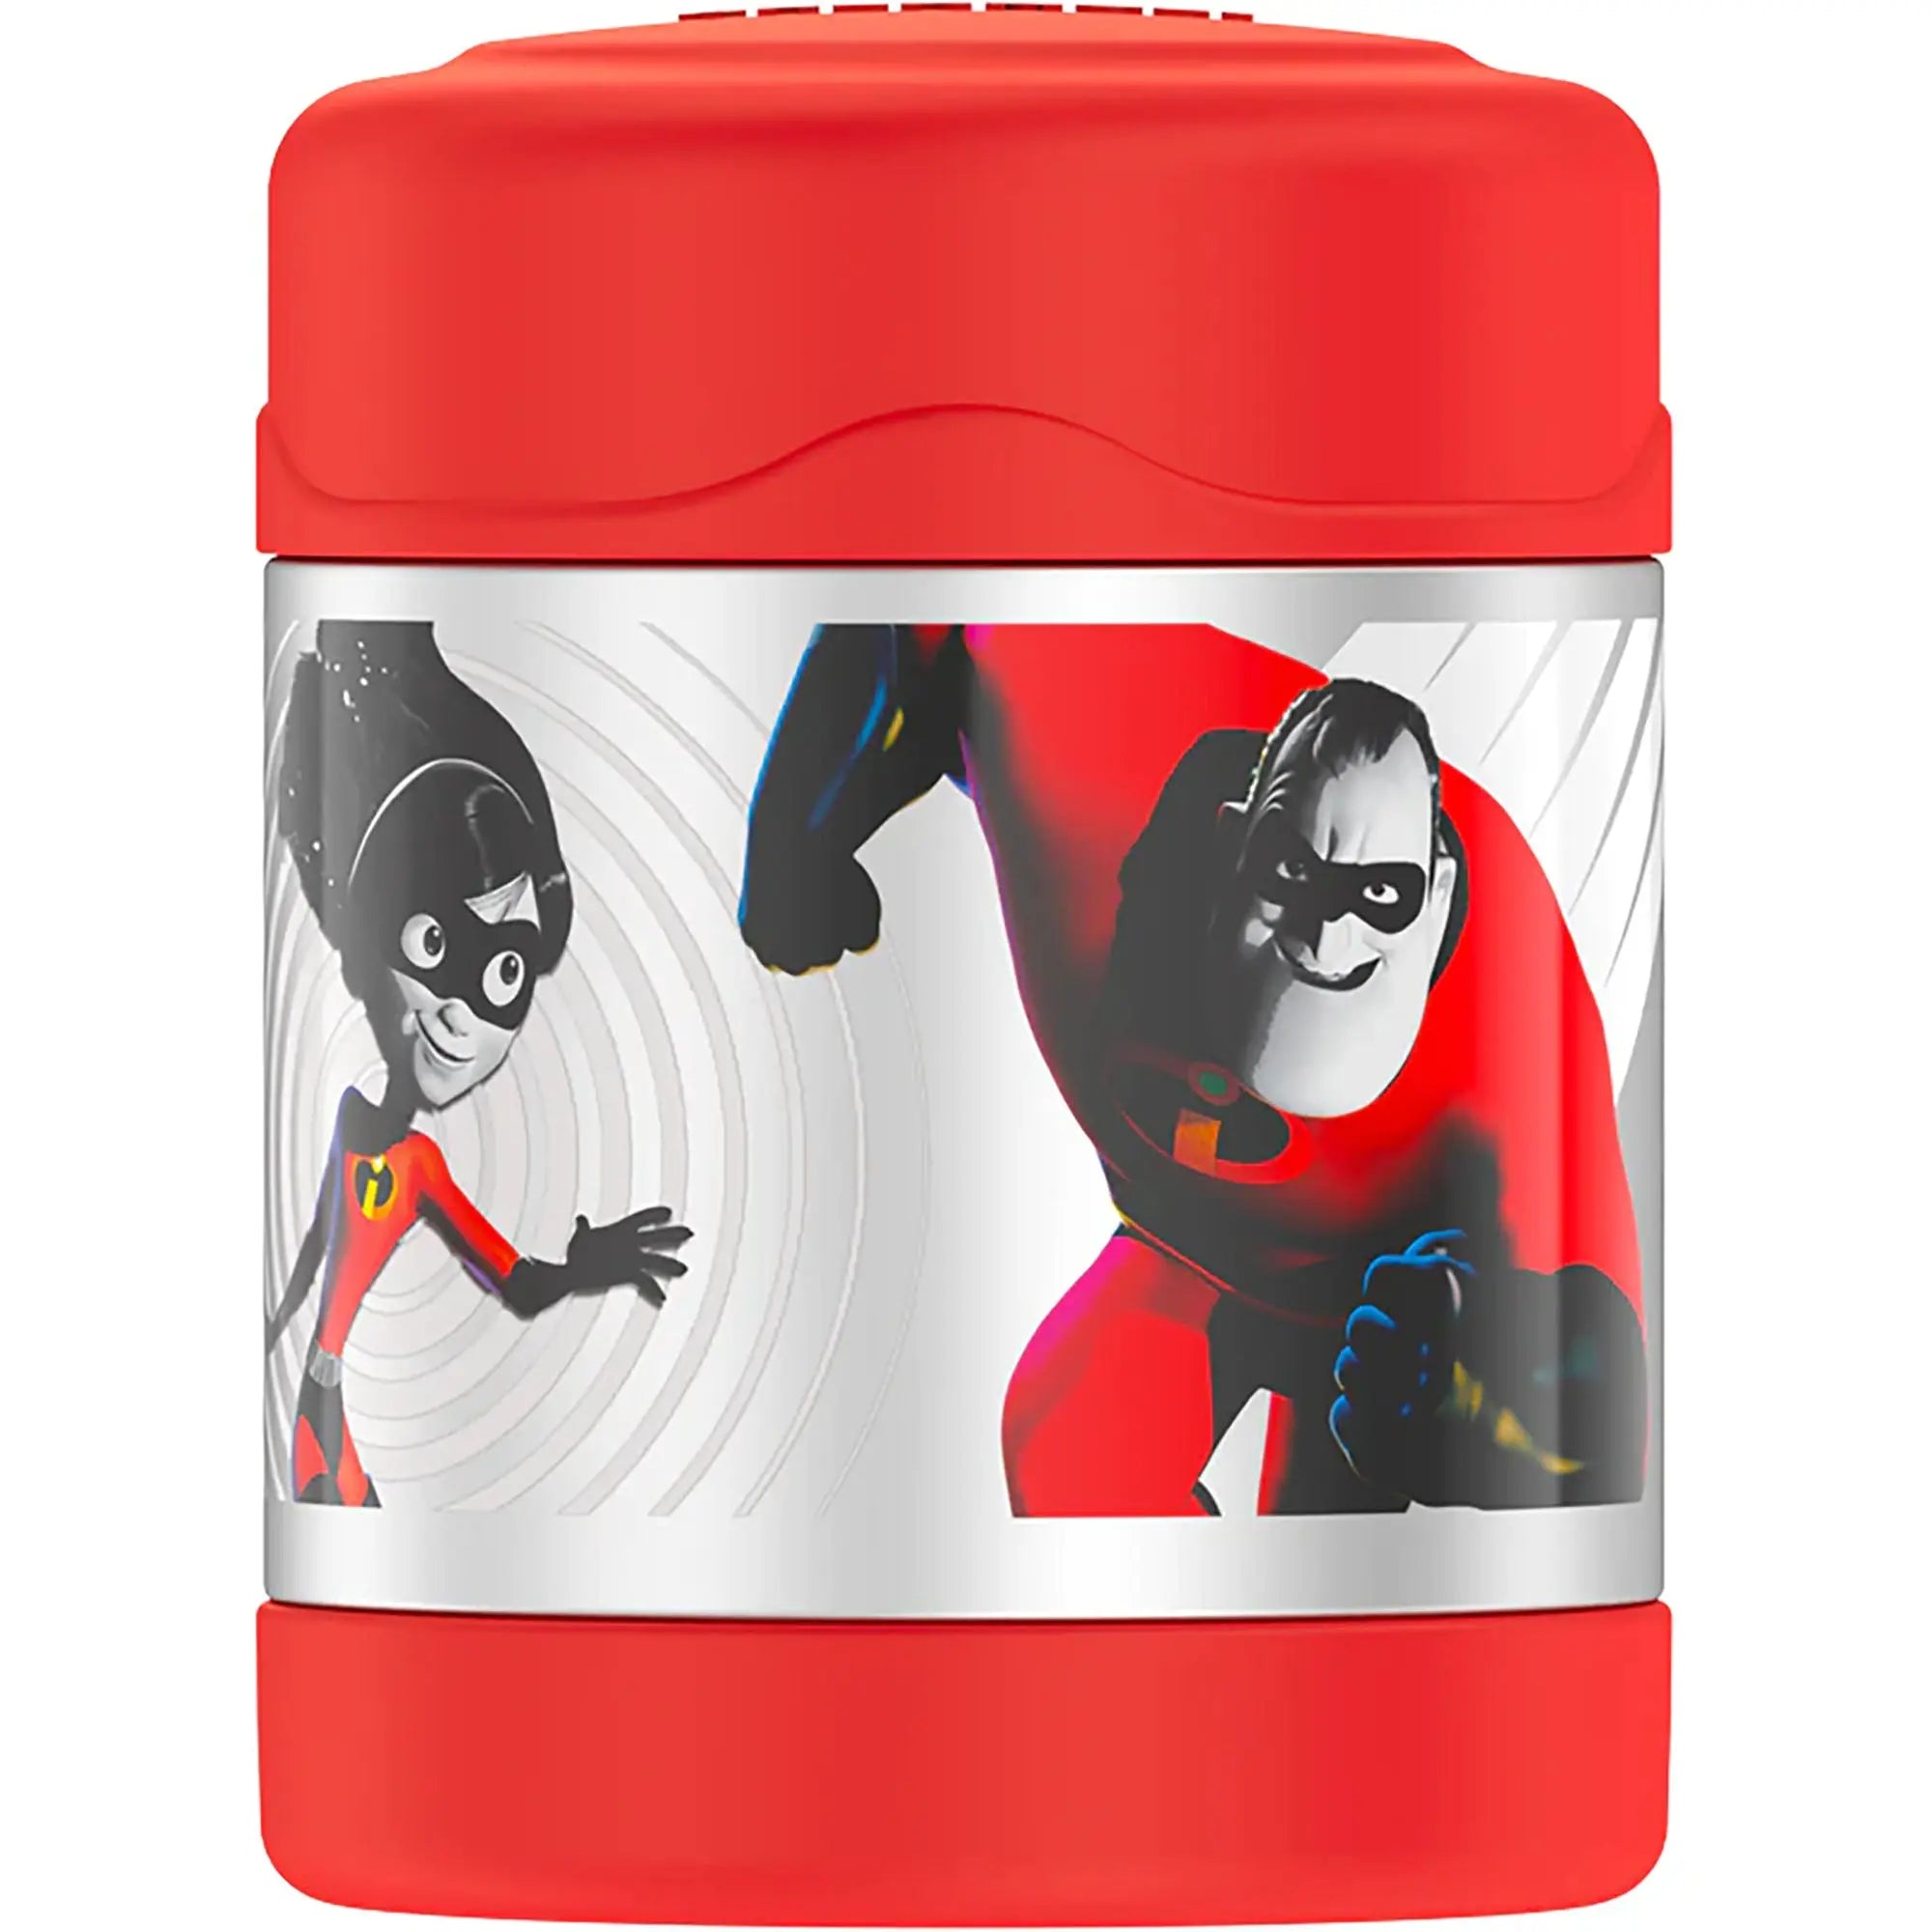 Thermos 10 oz. Kids Funtainer Insulated Stainless Steel Food Jar - Incredibles 2 Thermos